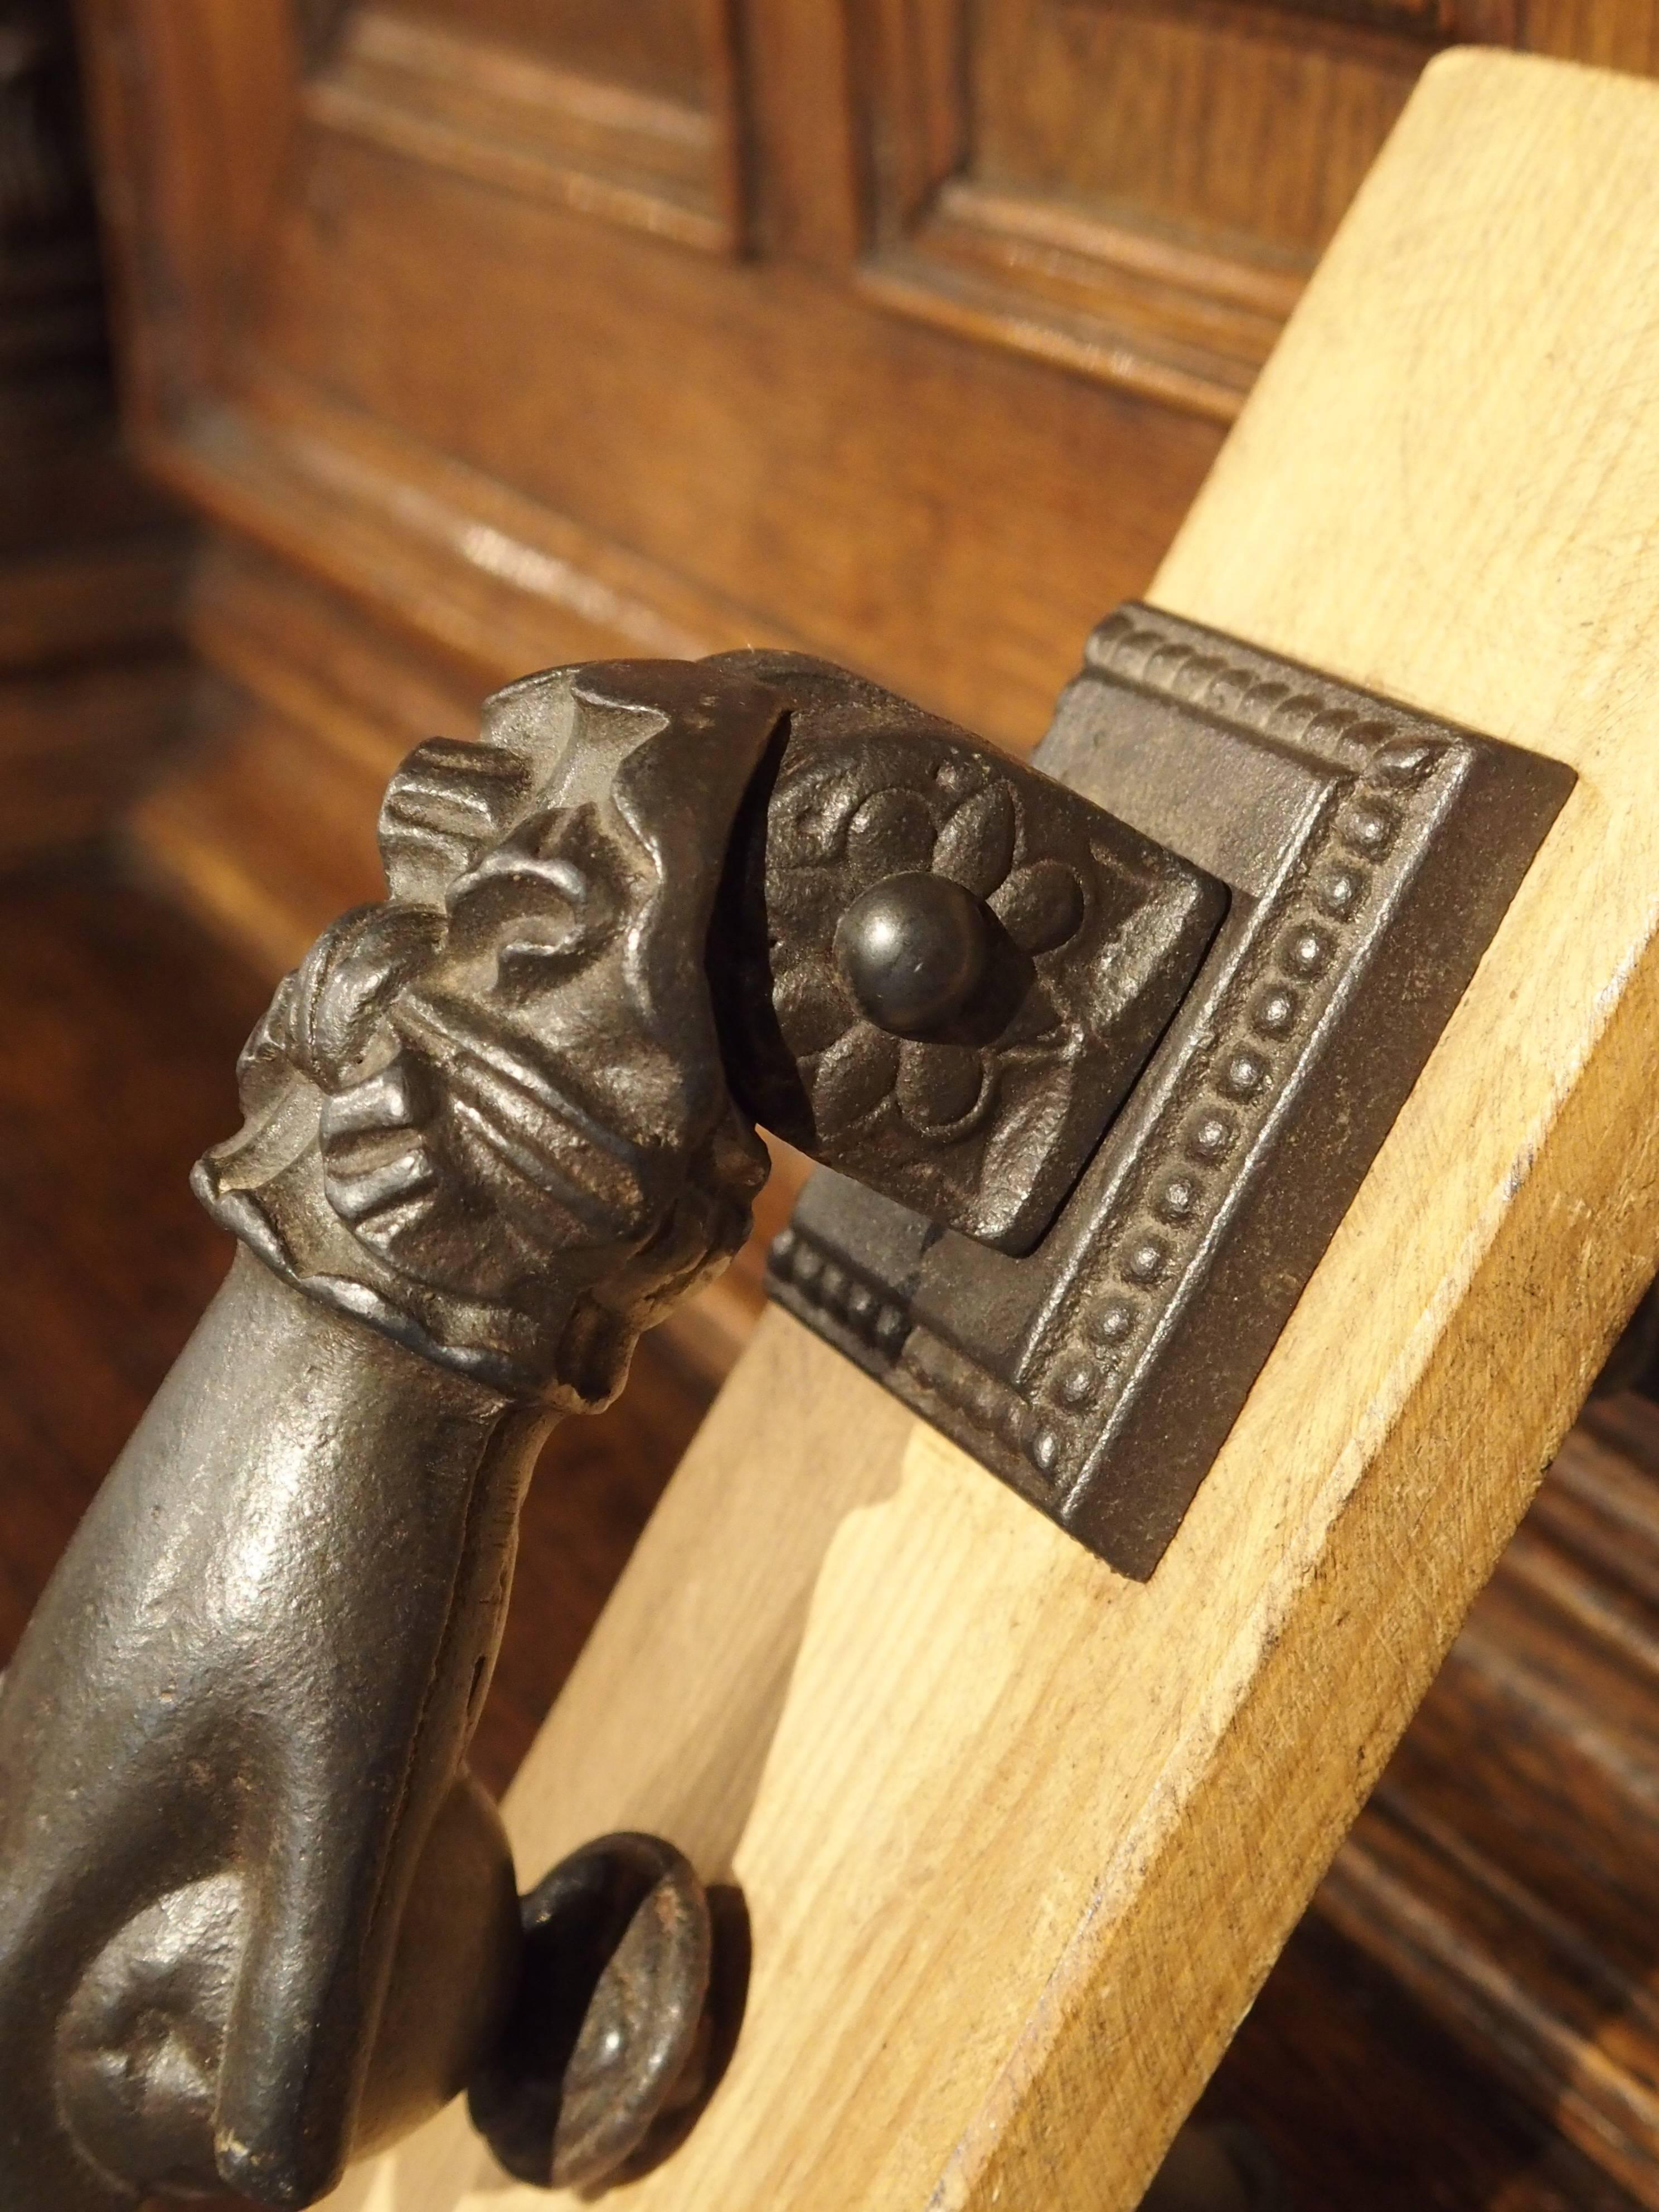 This is a French cast iron door knocker in the shape of a hand clutching a fruit. There is a ring on the middle finger and ribboned cuff on the wrist. This beautifully cast French door knocker will be an attribute to any entrance door.